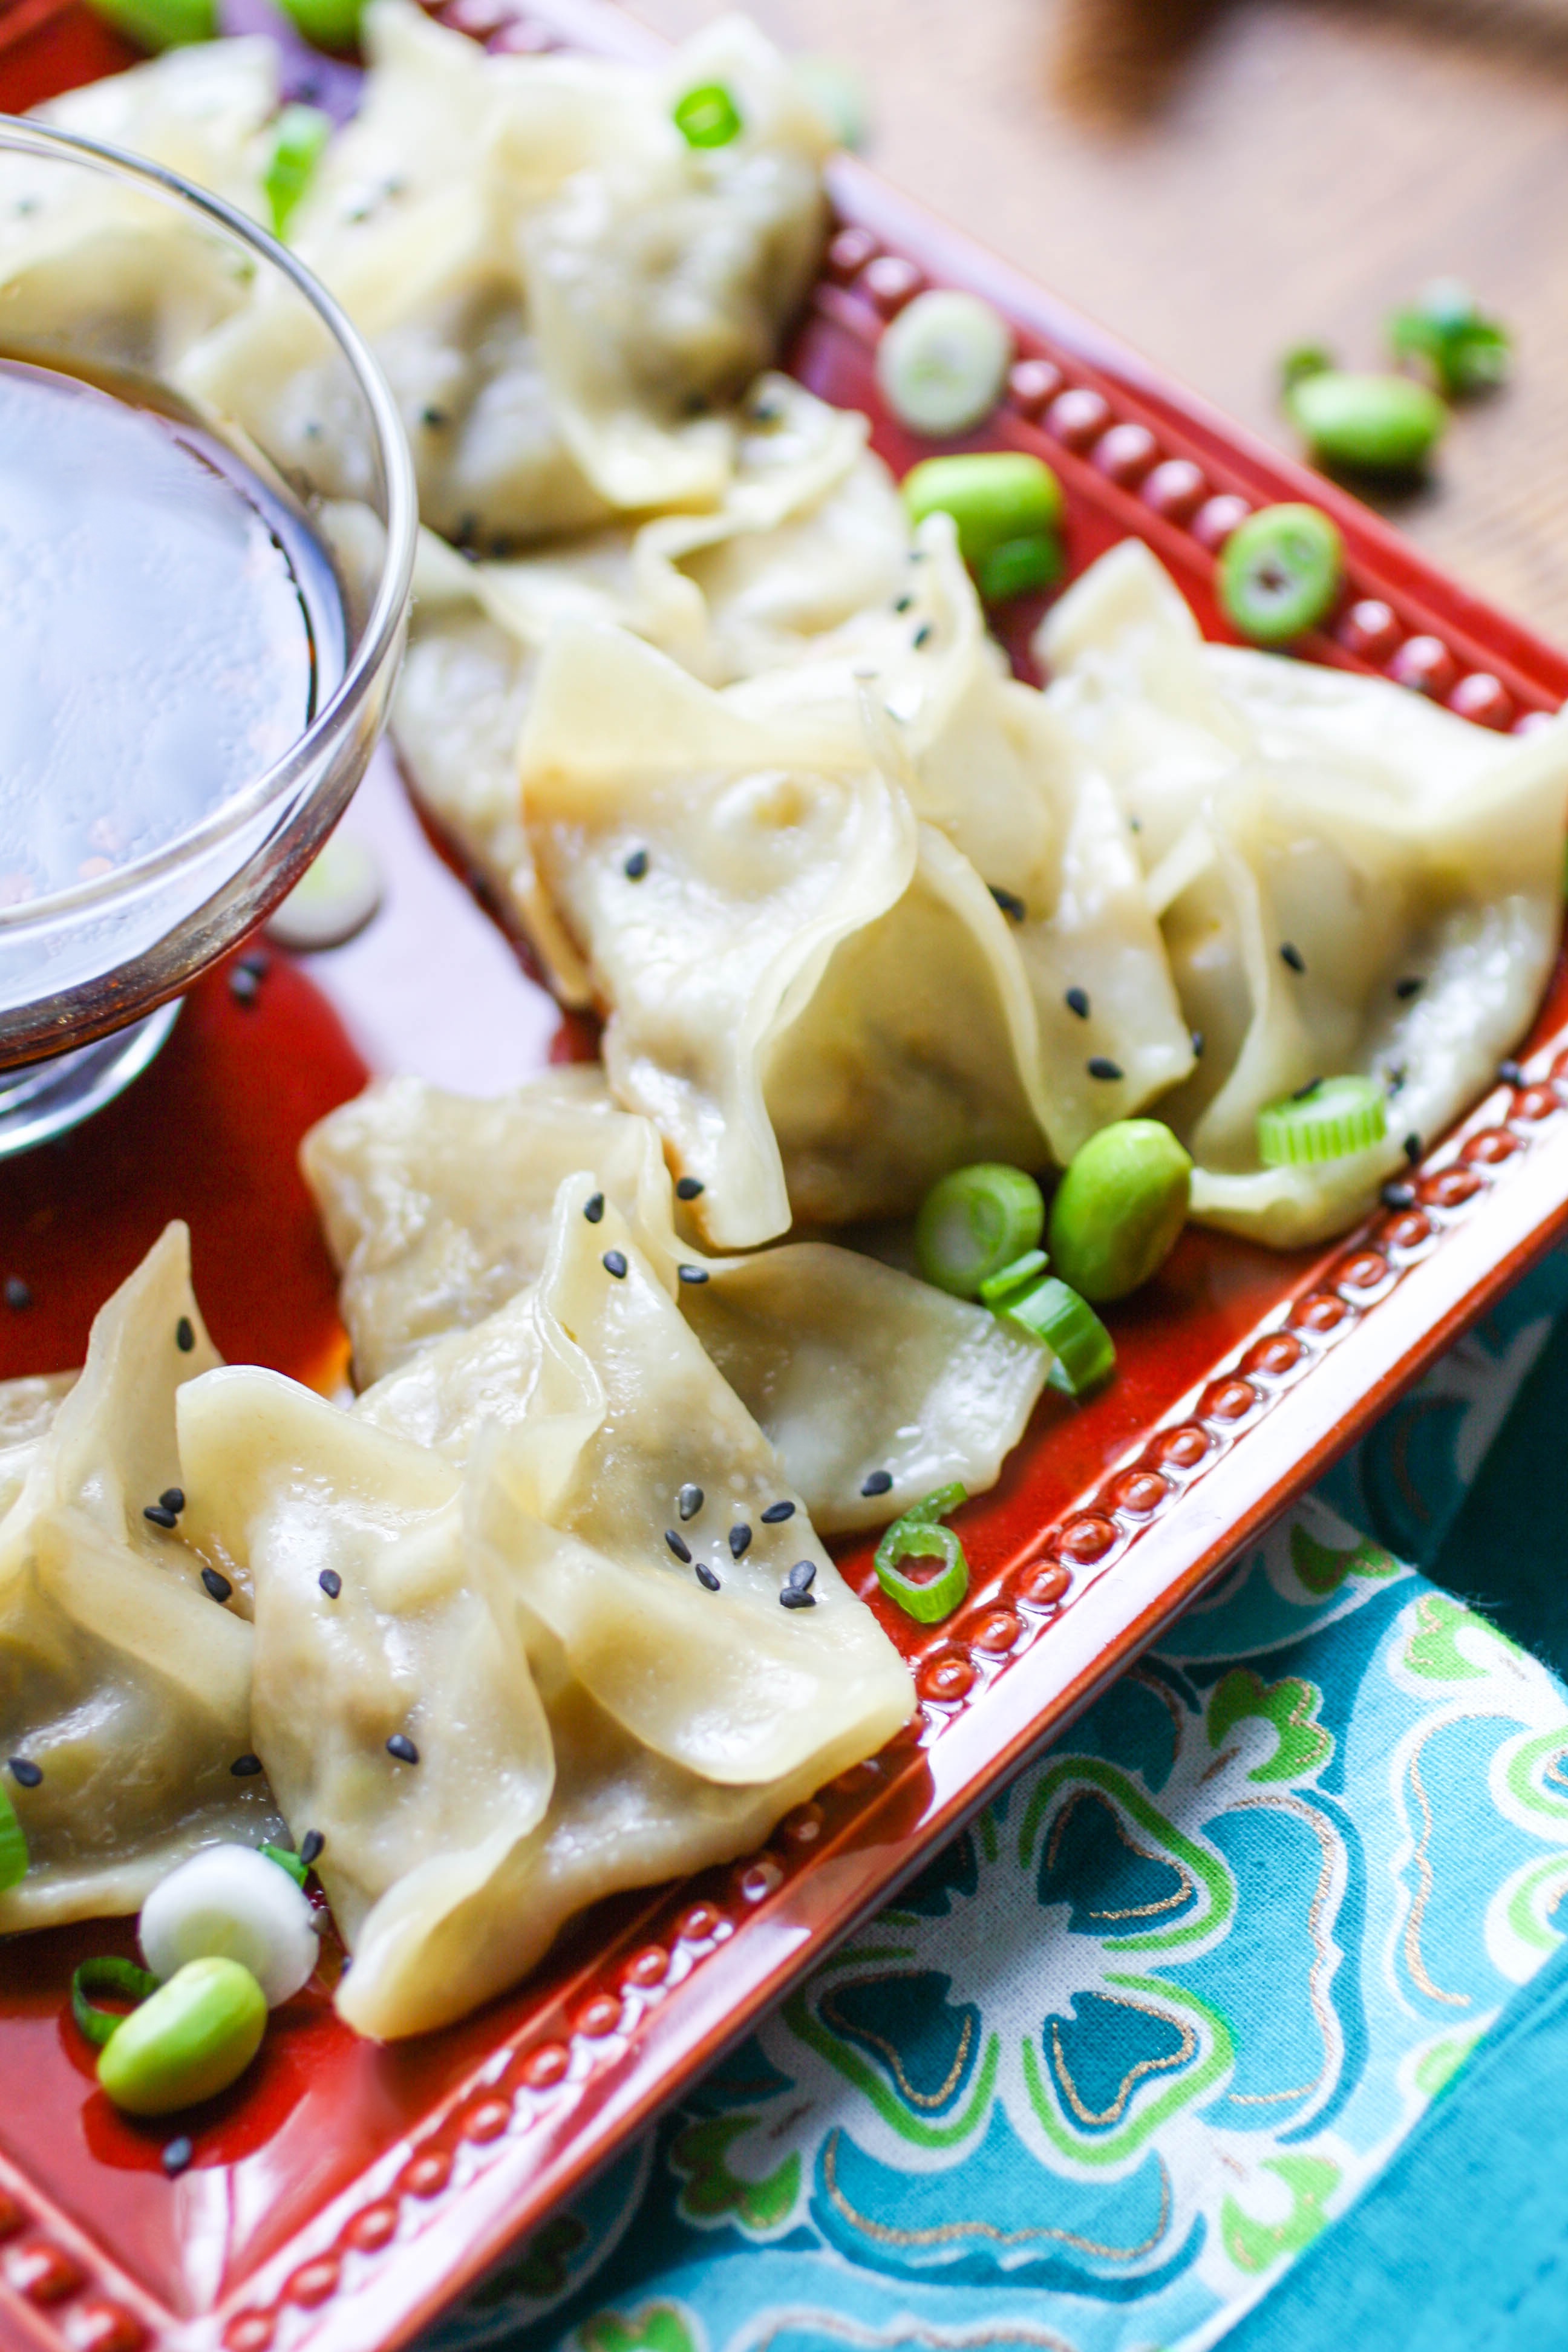 Edamame and Mushroom Potstickers with Dipping Sauce are fun to snack on, and tasty, too! Edamame and mushroom potstickers make a great appetizer or snack -- you'll love the dipping sauce, too.